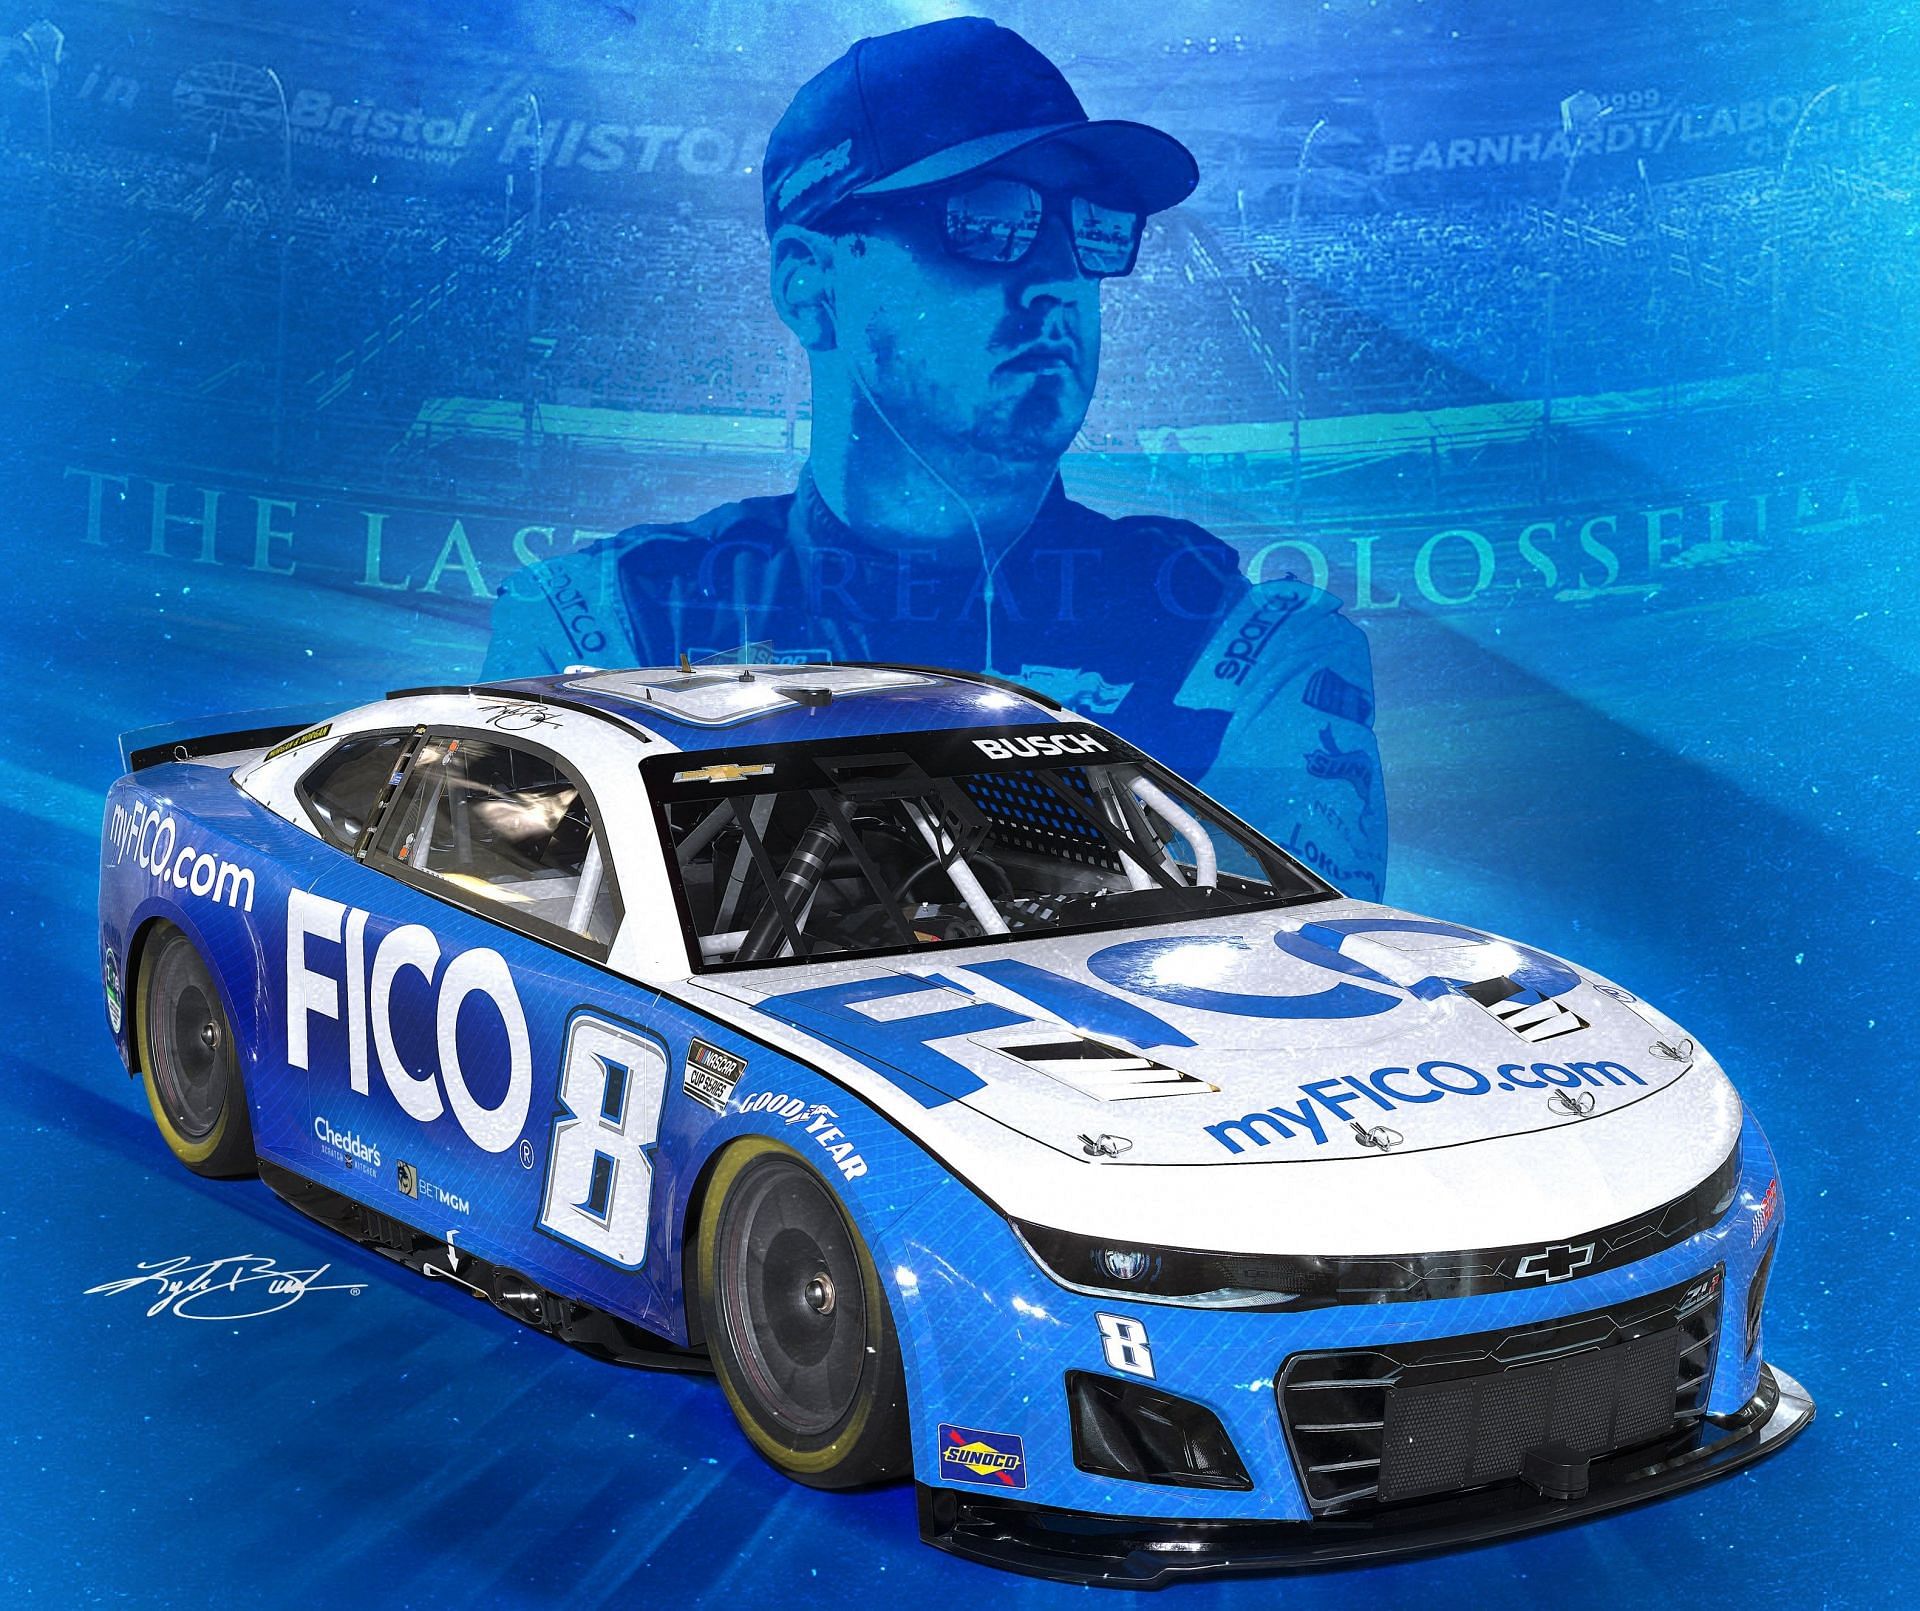 NASCAR Cup Series driver Kyle Busch partners with new sponsor FICO ahead of Bristol Cup race